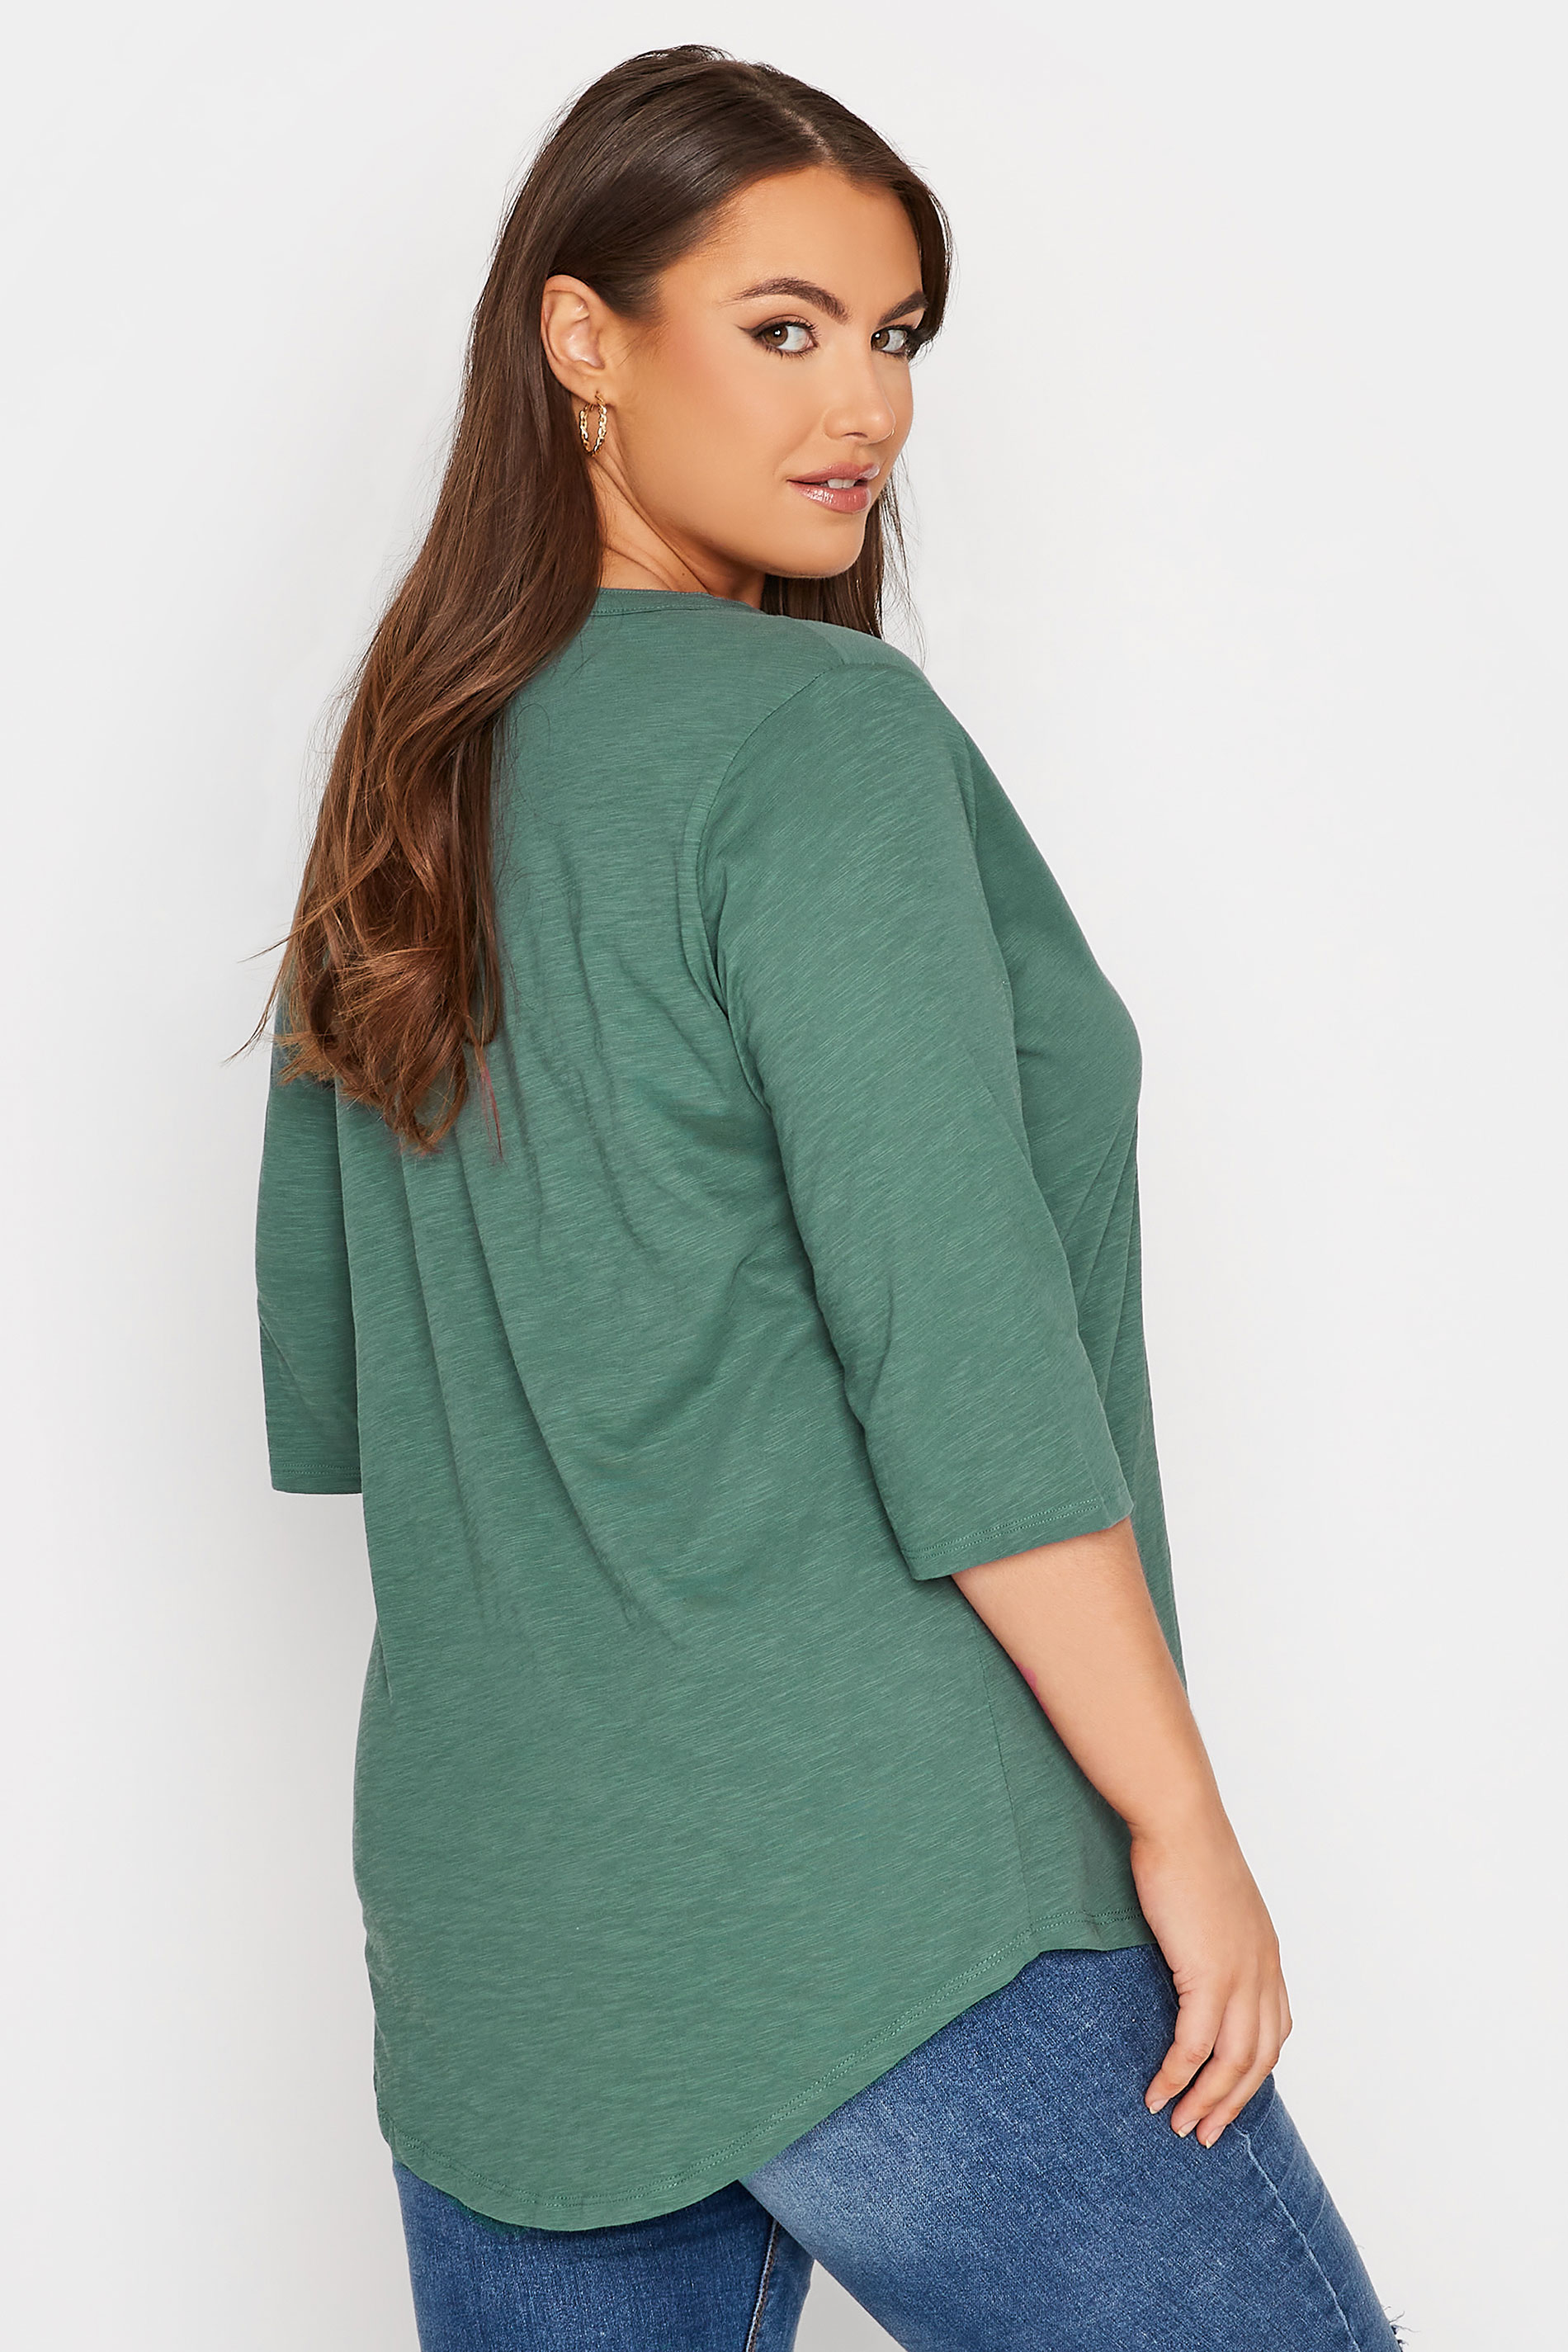 Grande taille  Tops Grande taille  Tops Casual | YOURS FOR GOOD - Top Vert Pastel Volanté - XO22633